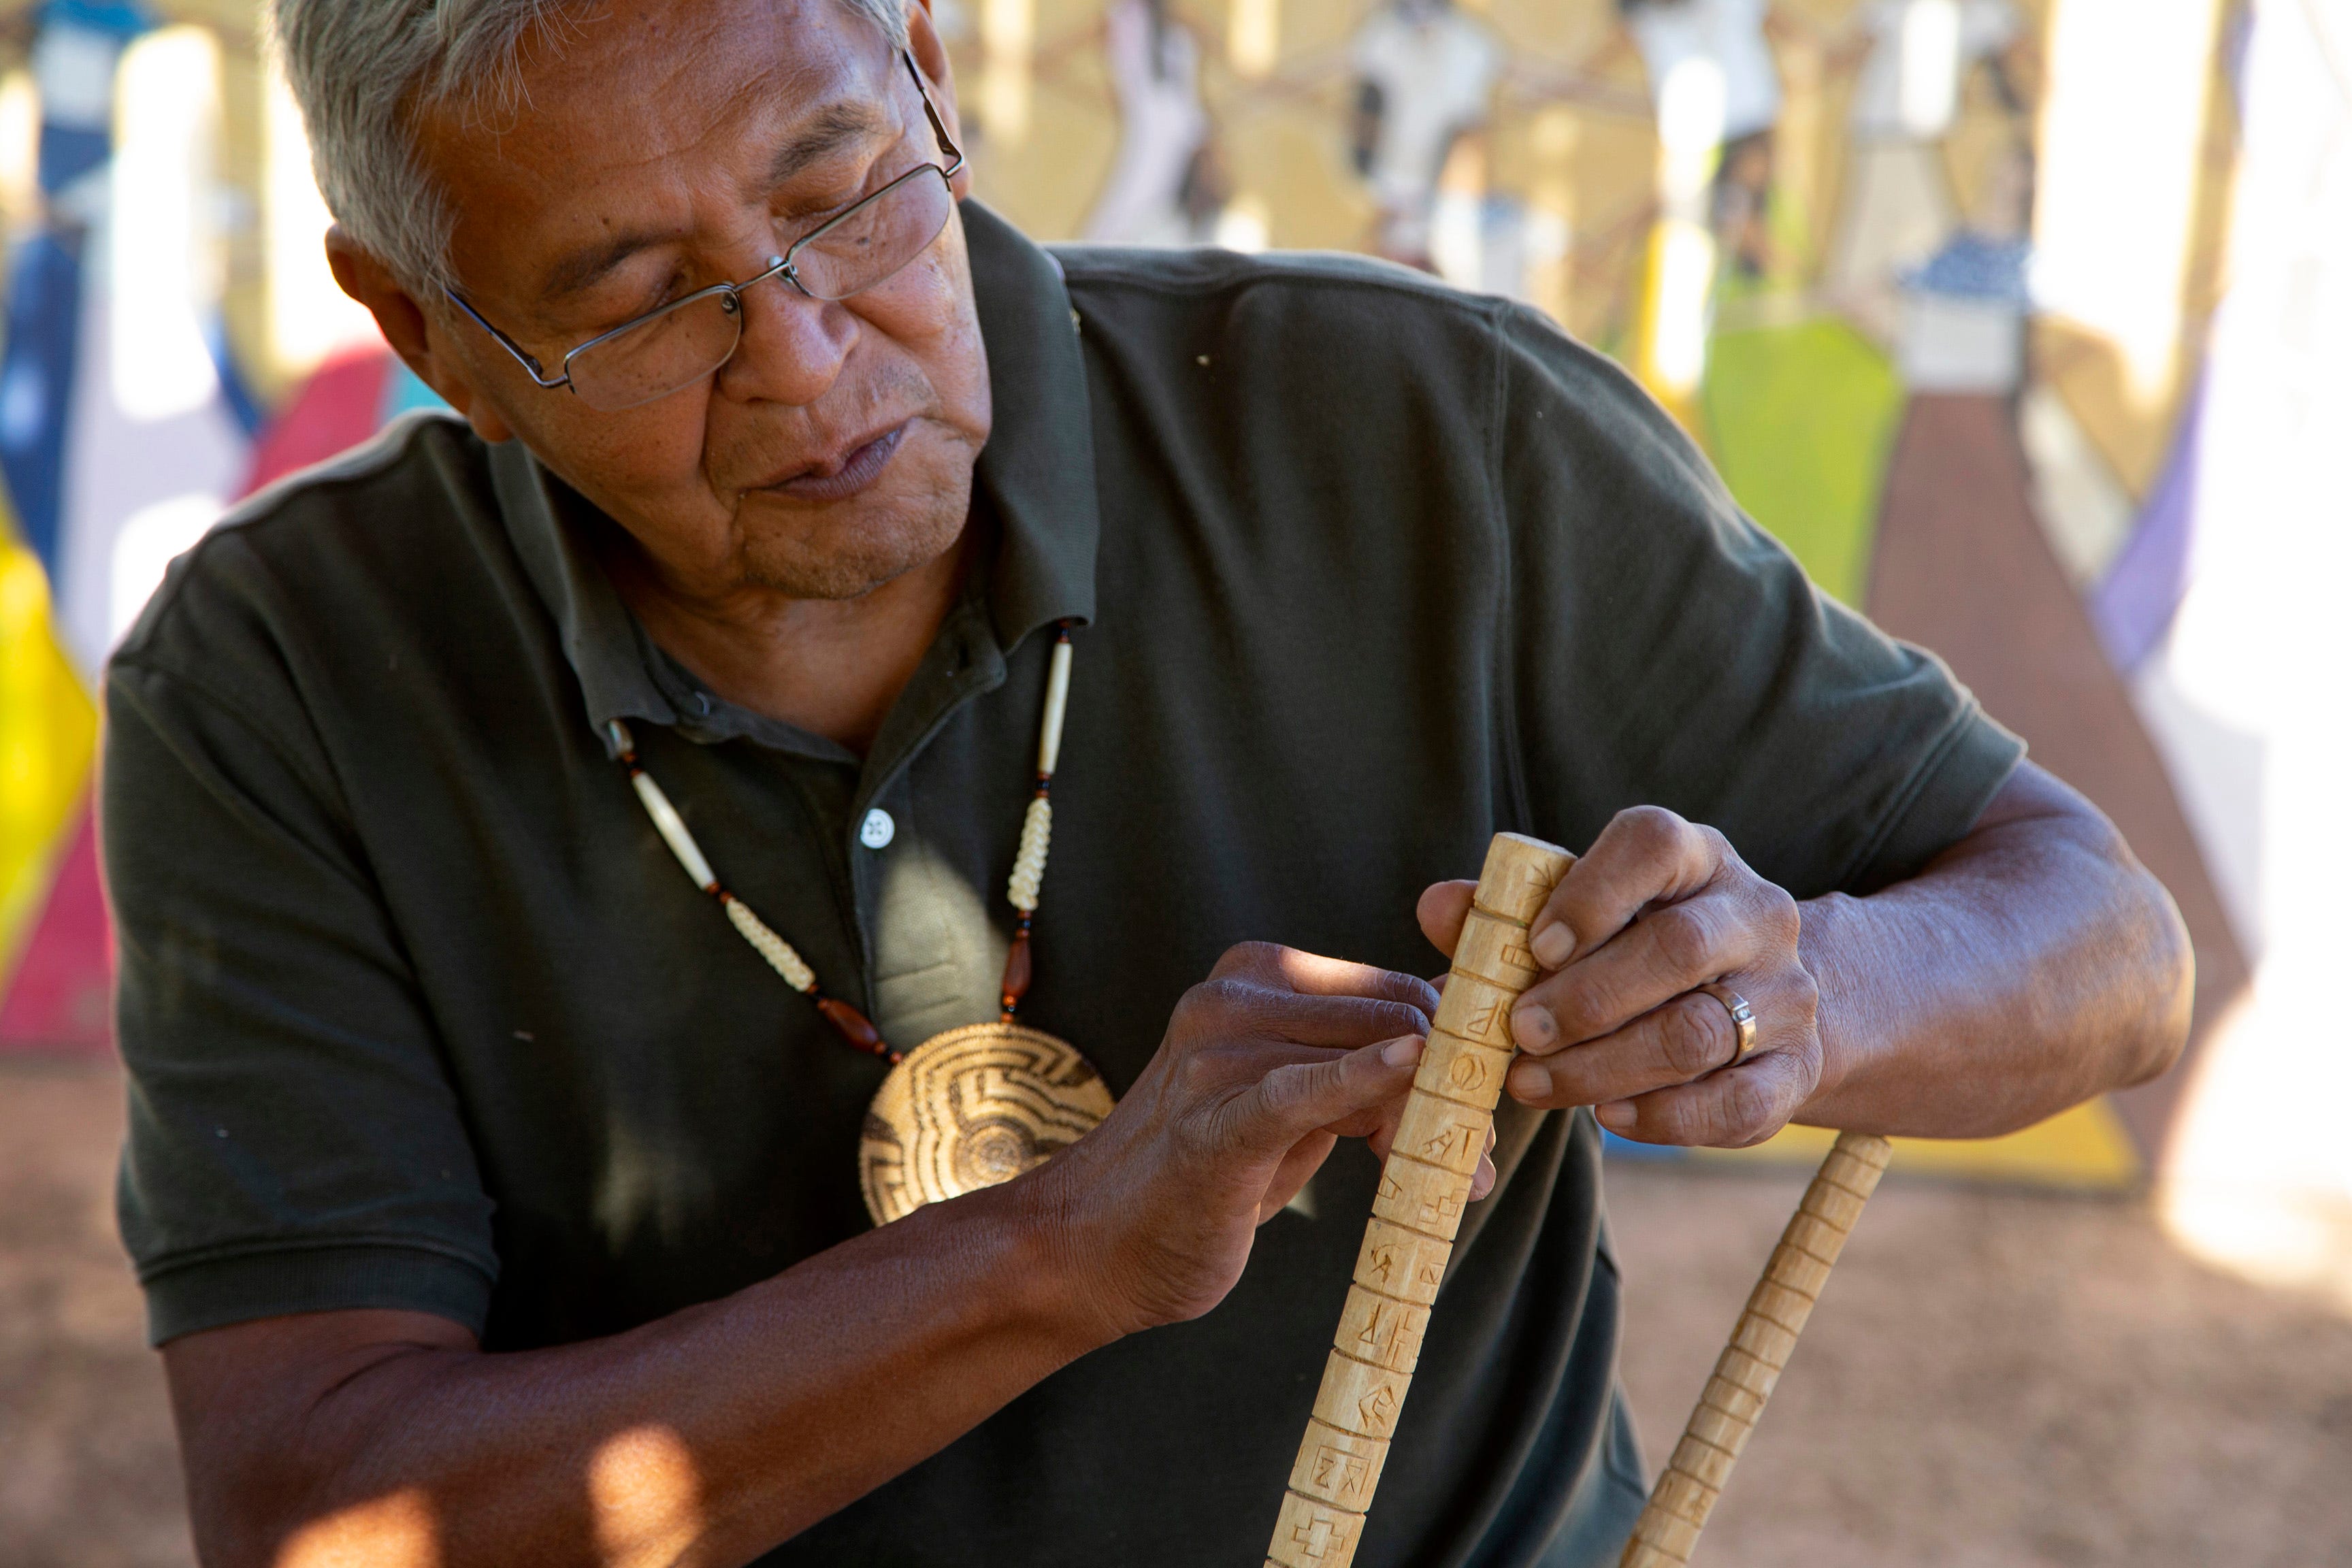 Royce Manuel, Salt River Pima-Maricopa Indian Community elder, uses traditional materials create bow, arrows, baskets, and flutes. Manuel reads a calendar stick he created. Tribal artisans, cultural practitioners are experiencing issues in finding the natural materials they need.